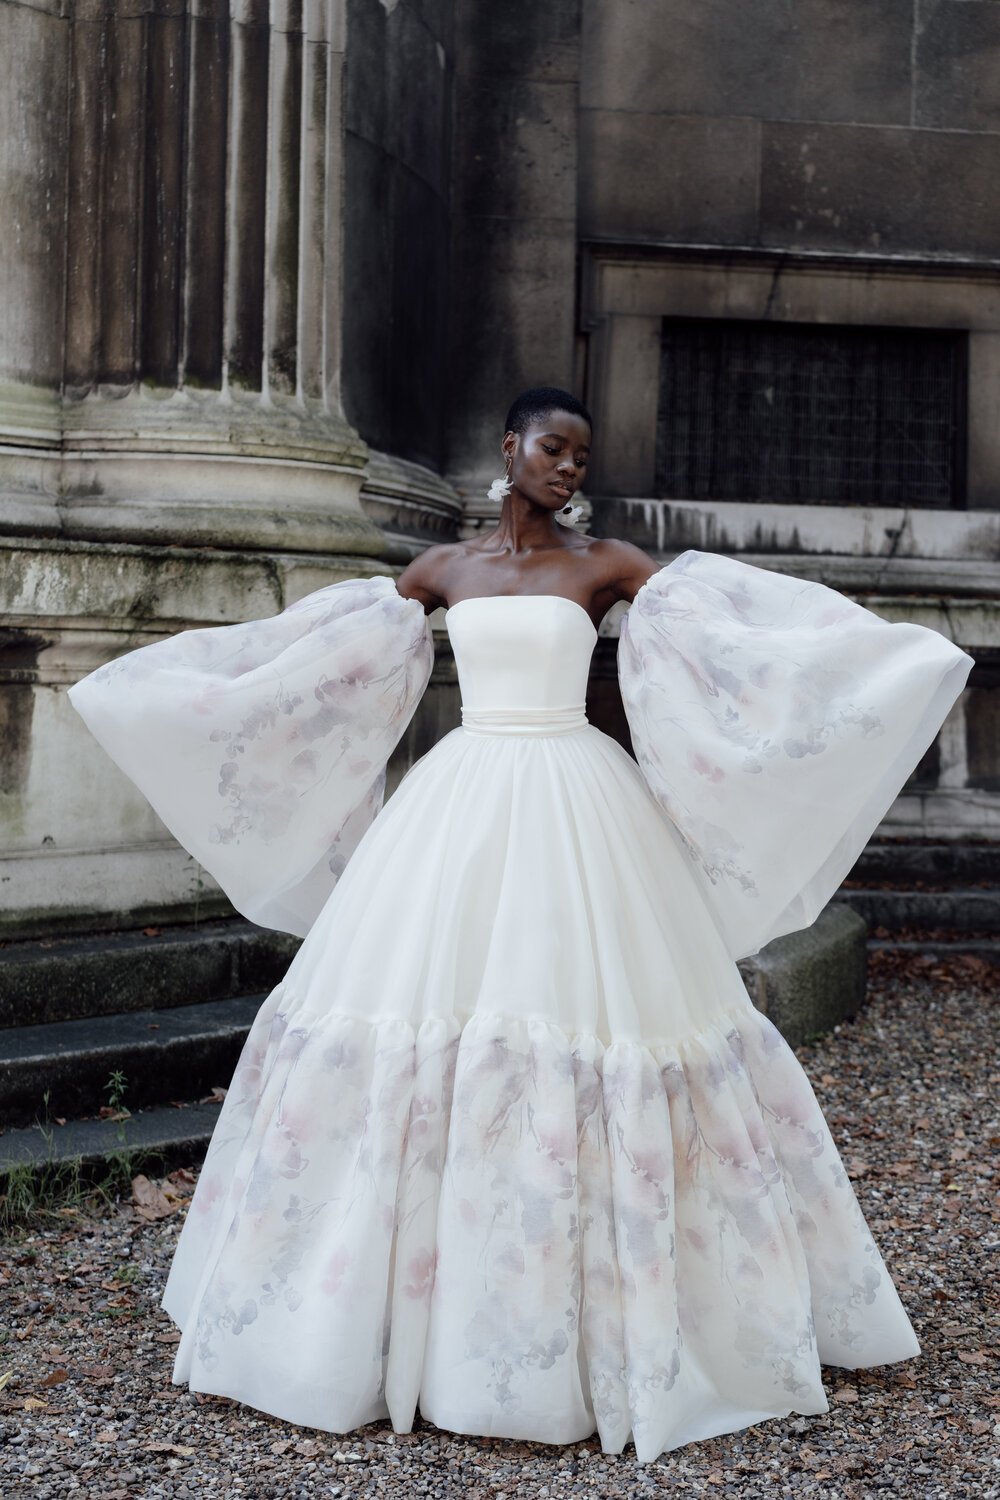 3 — Halfpenny London Wedding dresses and separates in London